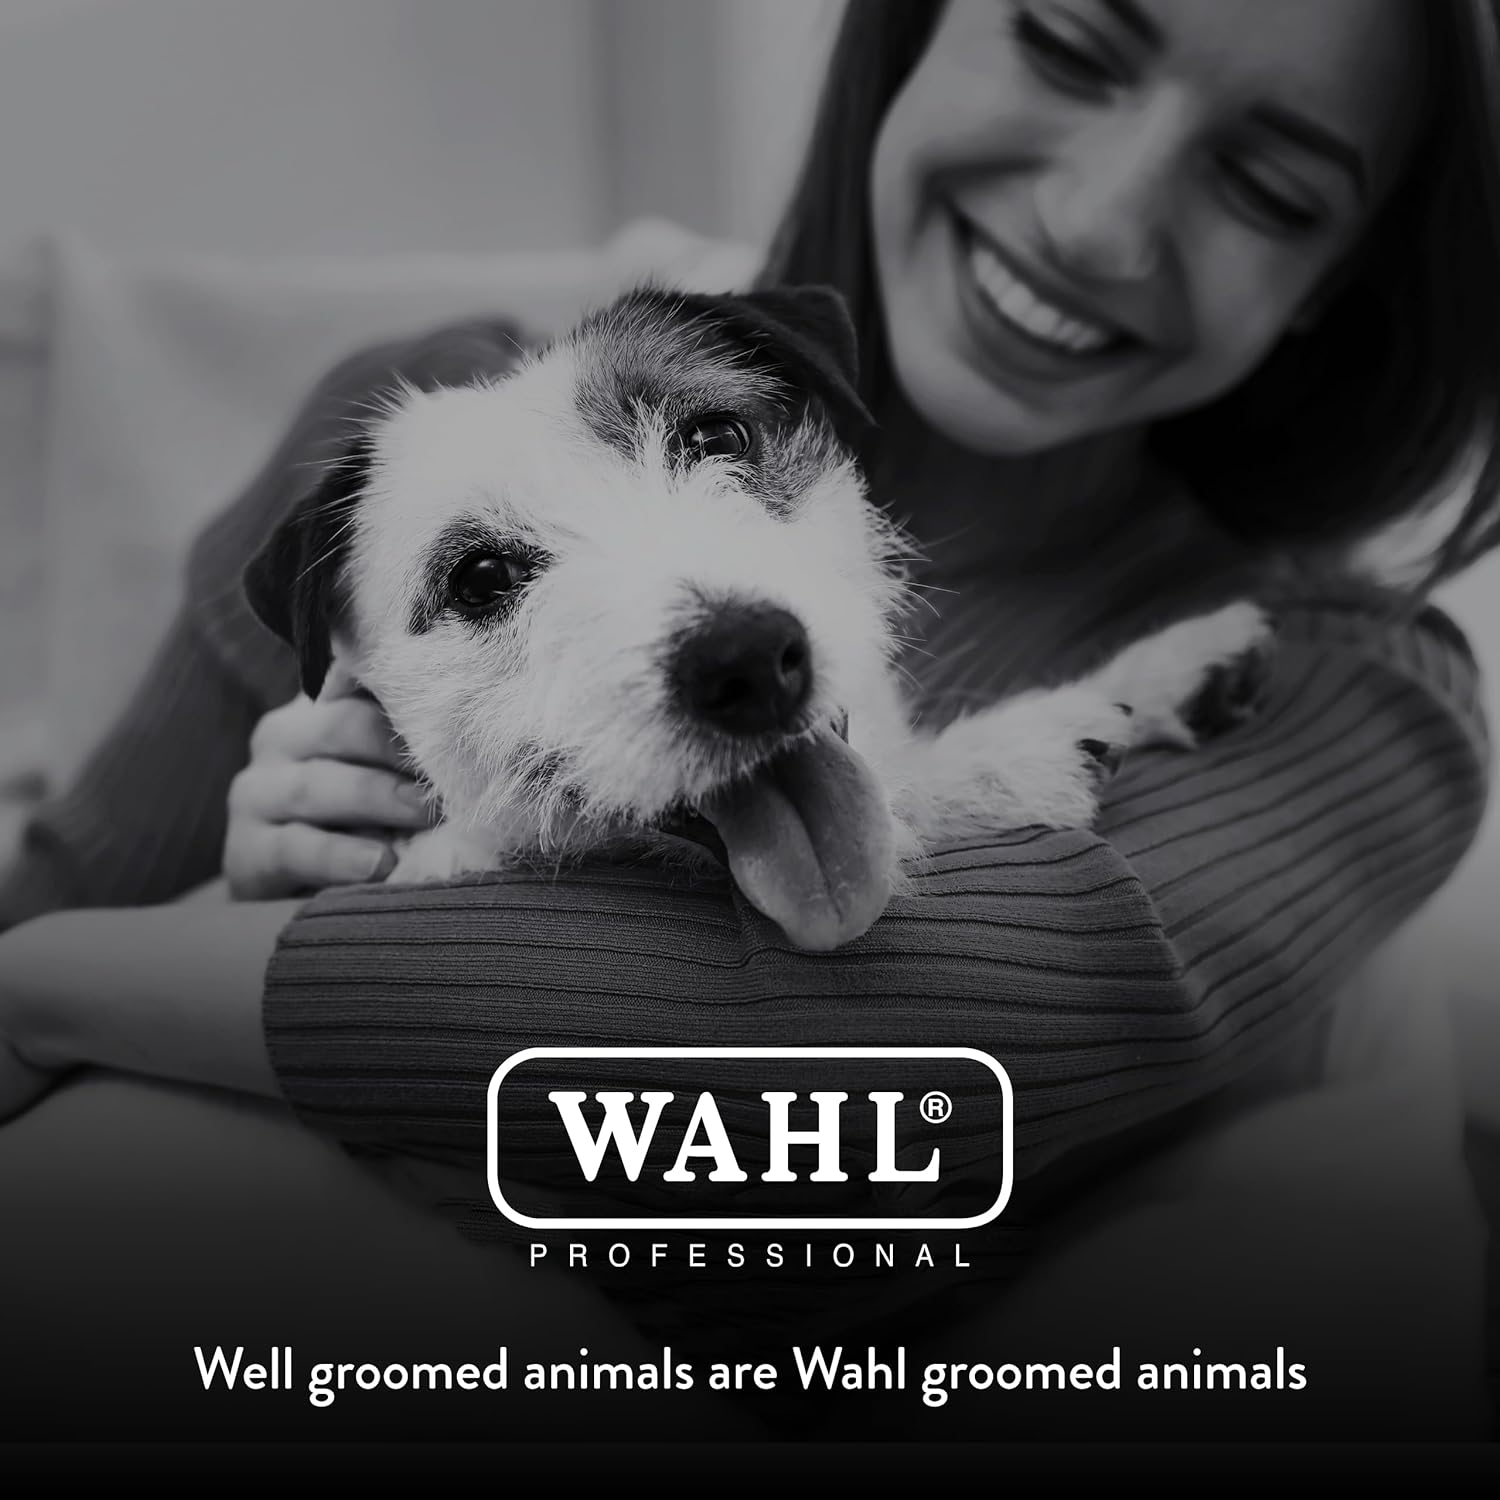 WAHL Professional Animal StyleSmart Cordless Clipper Kit for Pet, Dog & Cat Grooming (#70007) - Dog, Cat & Horse Grooming Supplies - Pet Hair Trimmer - with Guide Combs & Blade - Gold